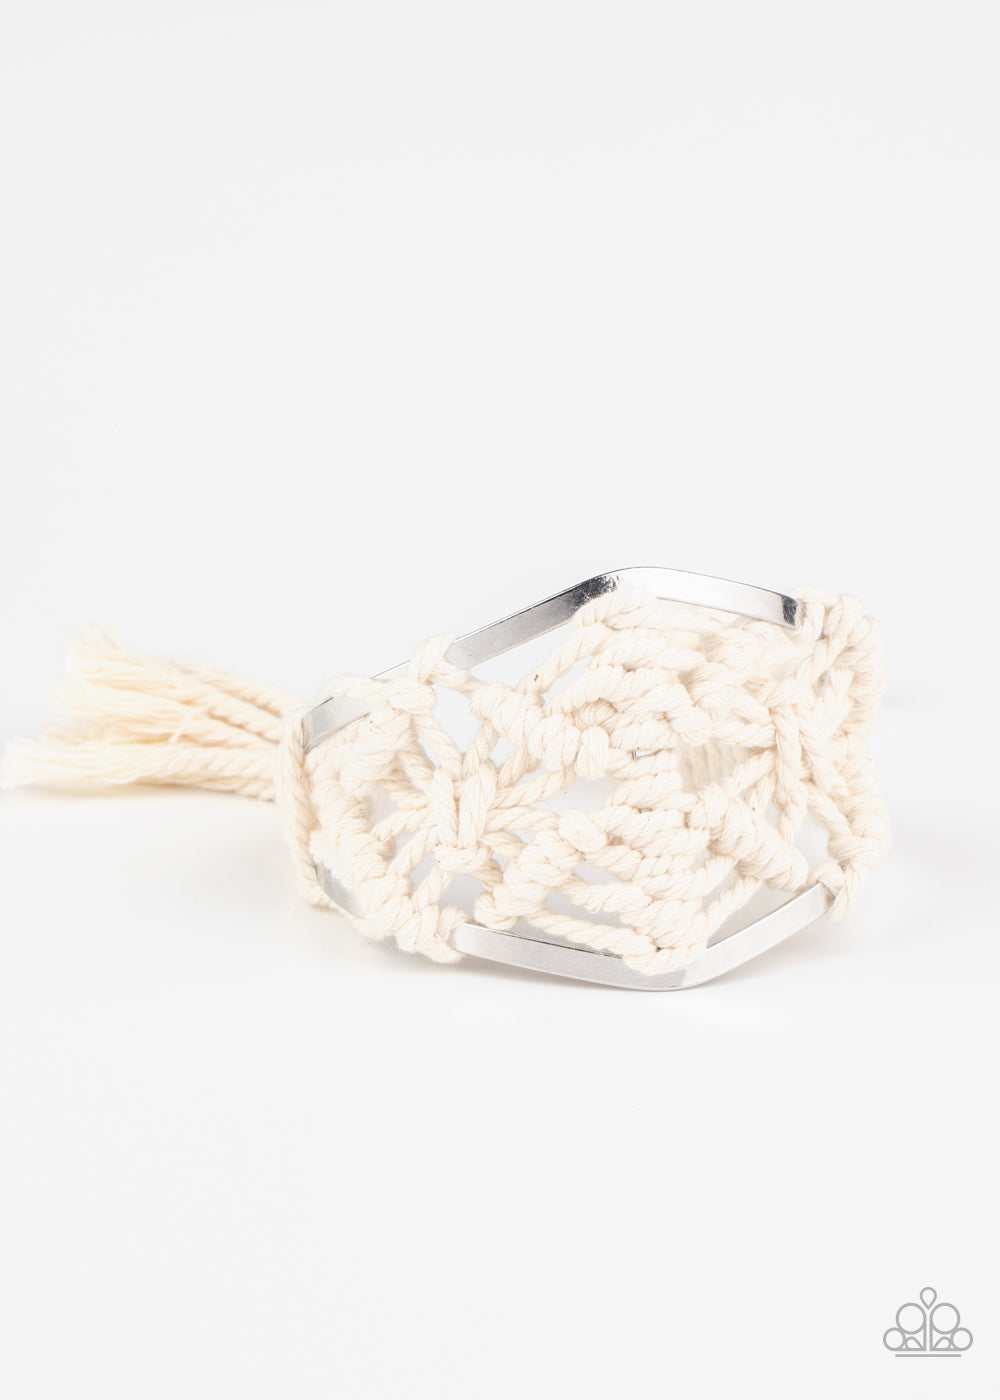 &lt;P&gt;White cording decoratively knots and weaves around an airy silver cuff for a macramé inspired look. Knotted around the ends, white tassels flair out from bottoms of the cuff for a wanderlust finish.
&lt;/P&gt;  

&lt;P&gt; &lt;I&gt;Sold as one individual.&lt;/I&gt;  &lt;/P&gt;


&lt;img src=\&quot;https://d9b54x484lq62.cloudfront.net/paparazzi/shopping/images/517_tag150x115_1.png\&quot; alt=\&quot;New Kit\&quot; align=\&quot;middle\&quot; height=\&quot;50\&quot; width=\&quot;50\&quot;/&gt;